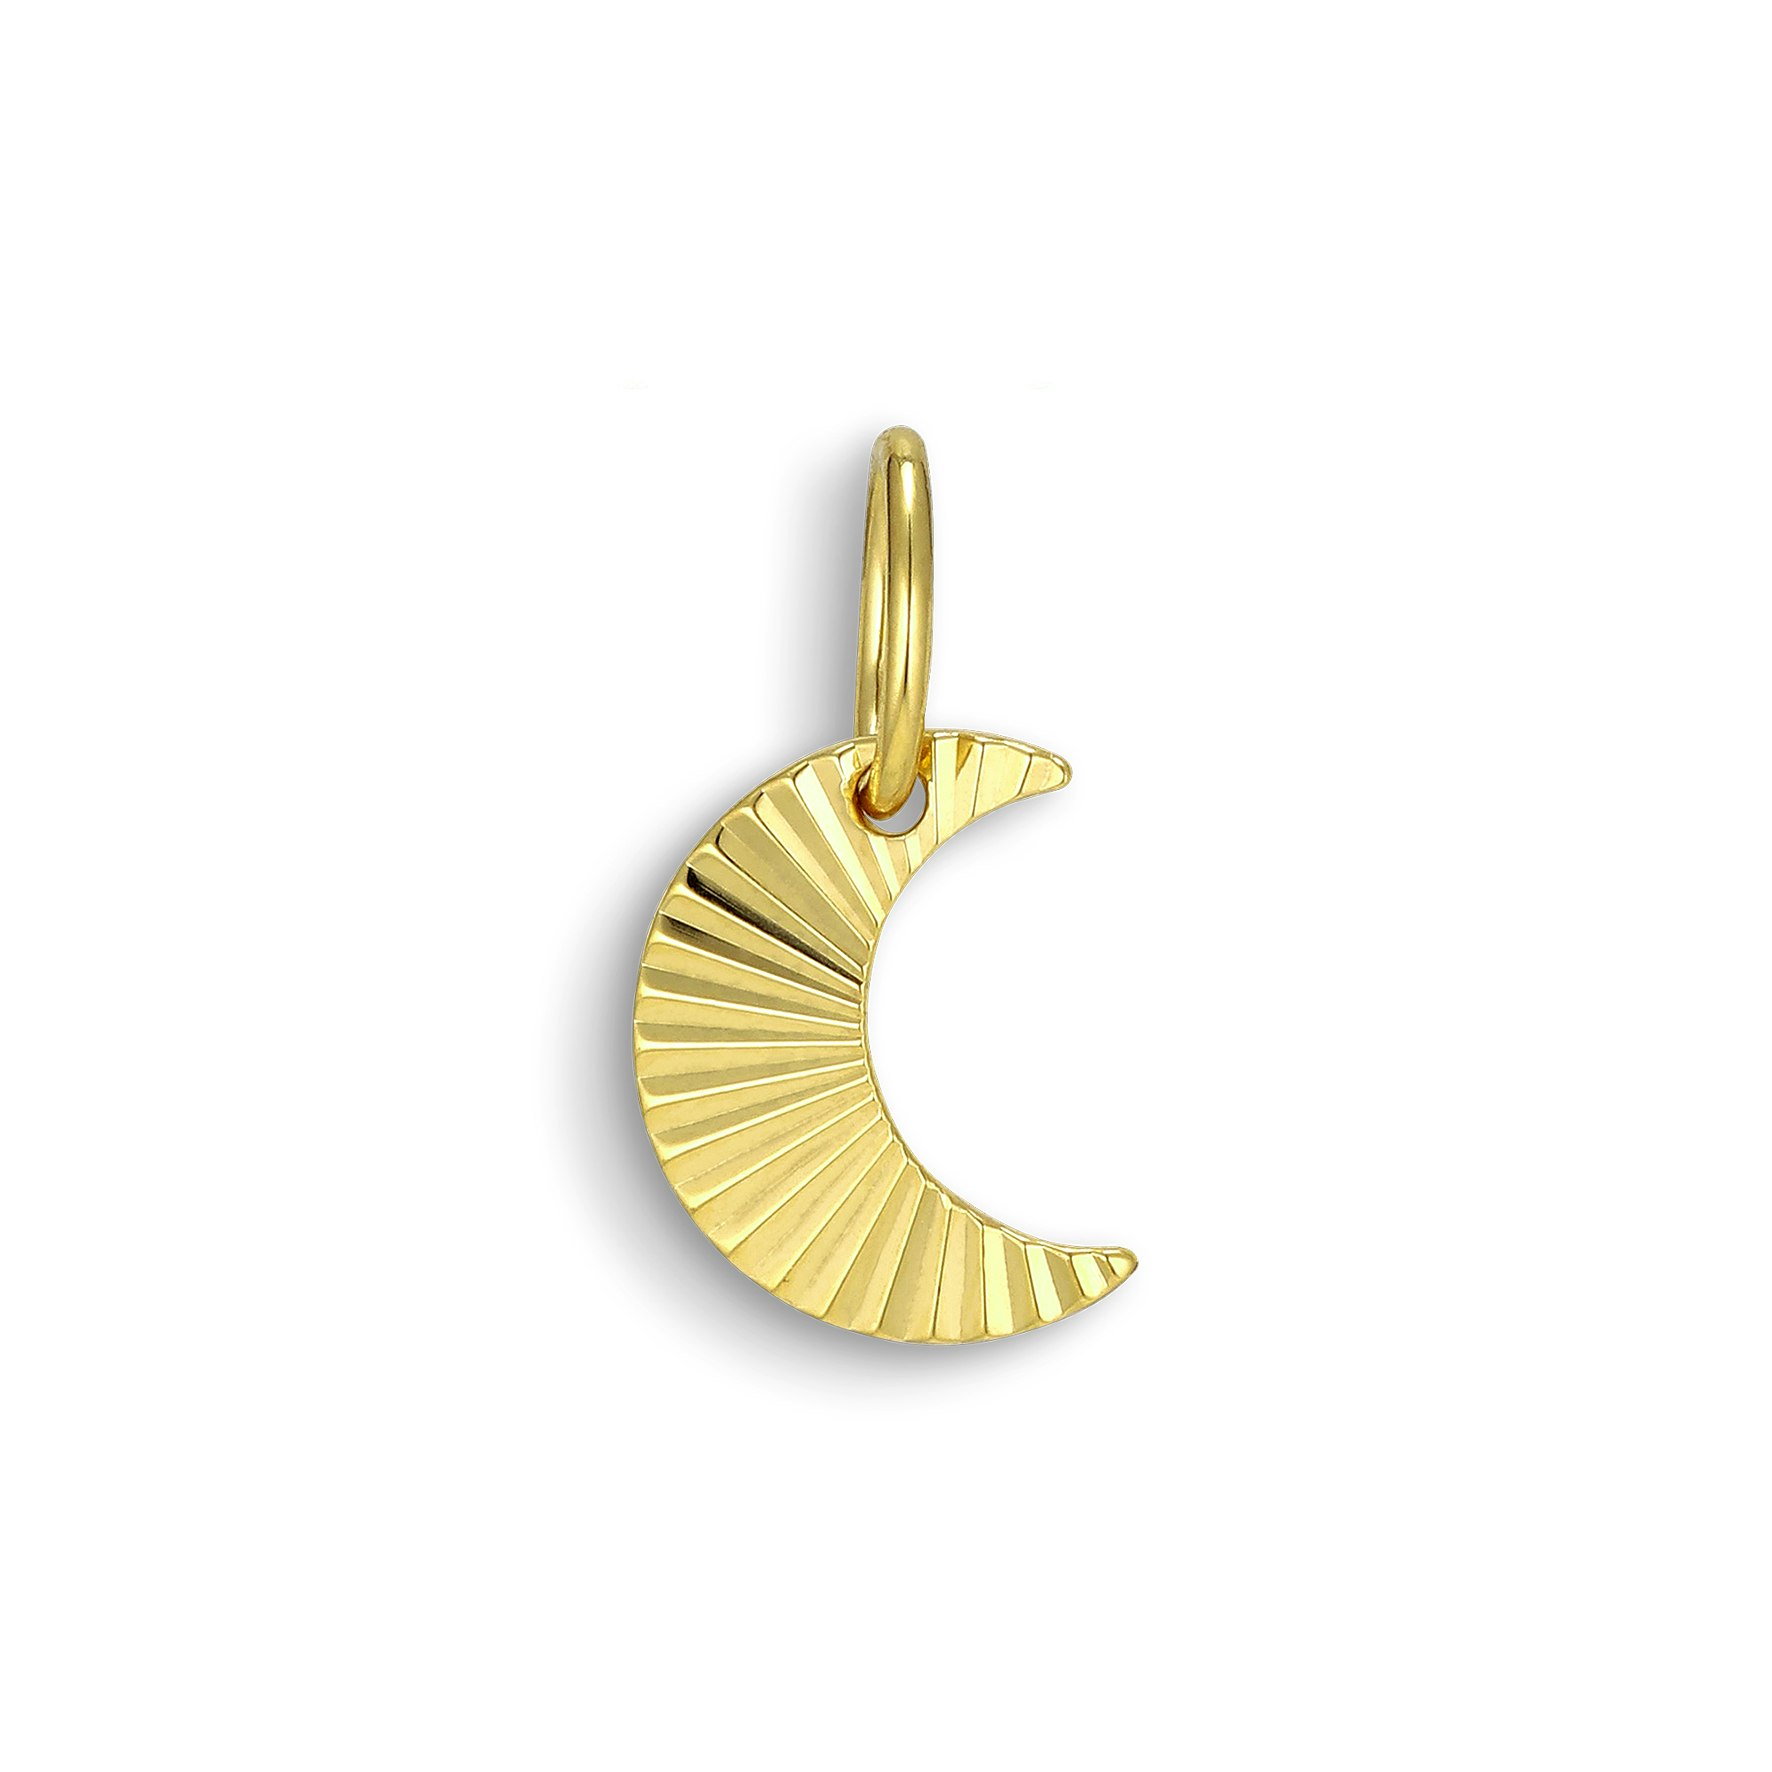 Reflection Half Moon Pendant from Jane Kønig in Goldplated Silver Sterling 925